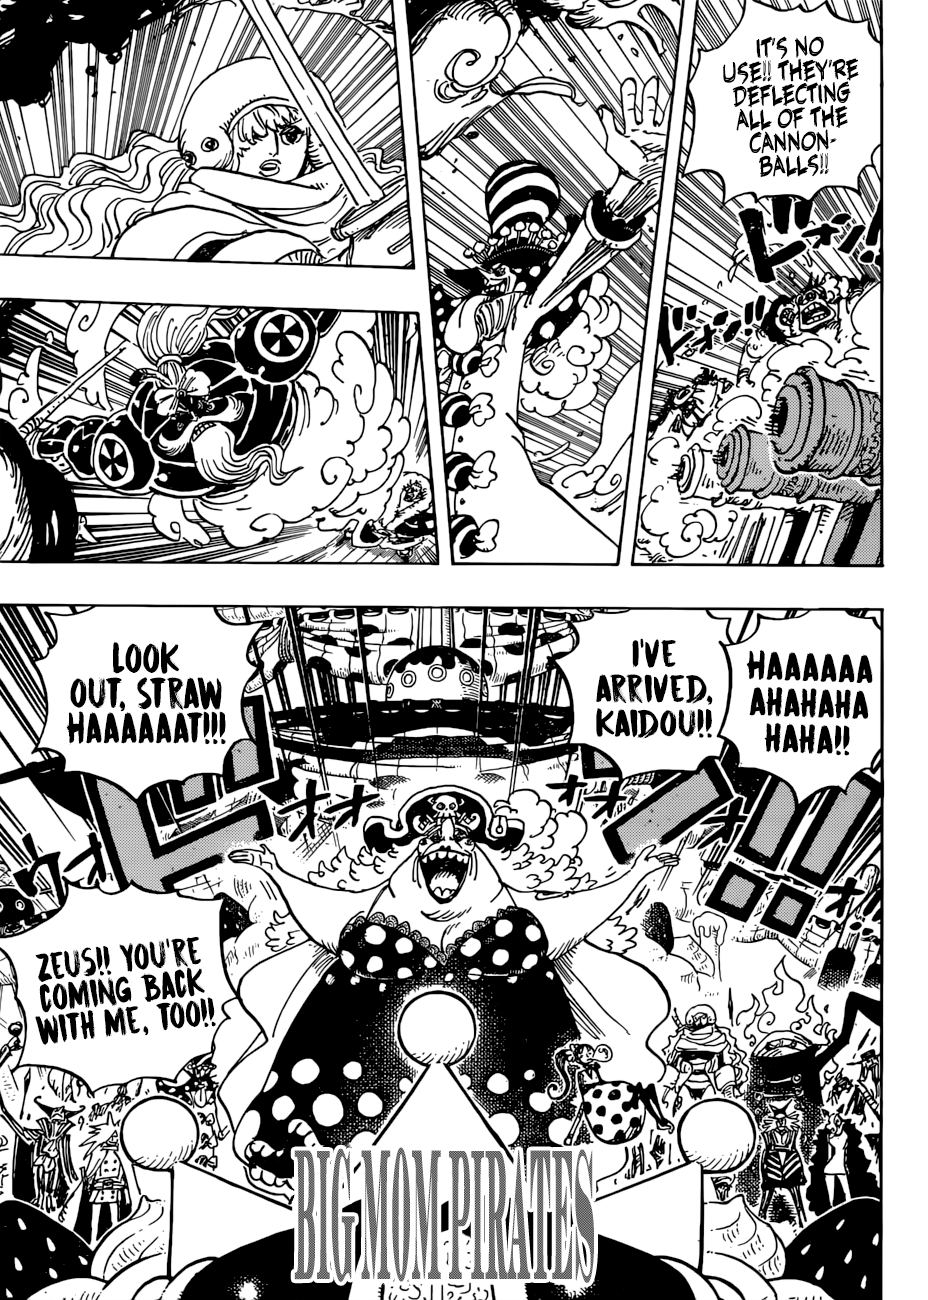 One Piece, Chapter 930 - Ebisu Town image 08